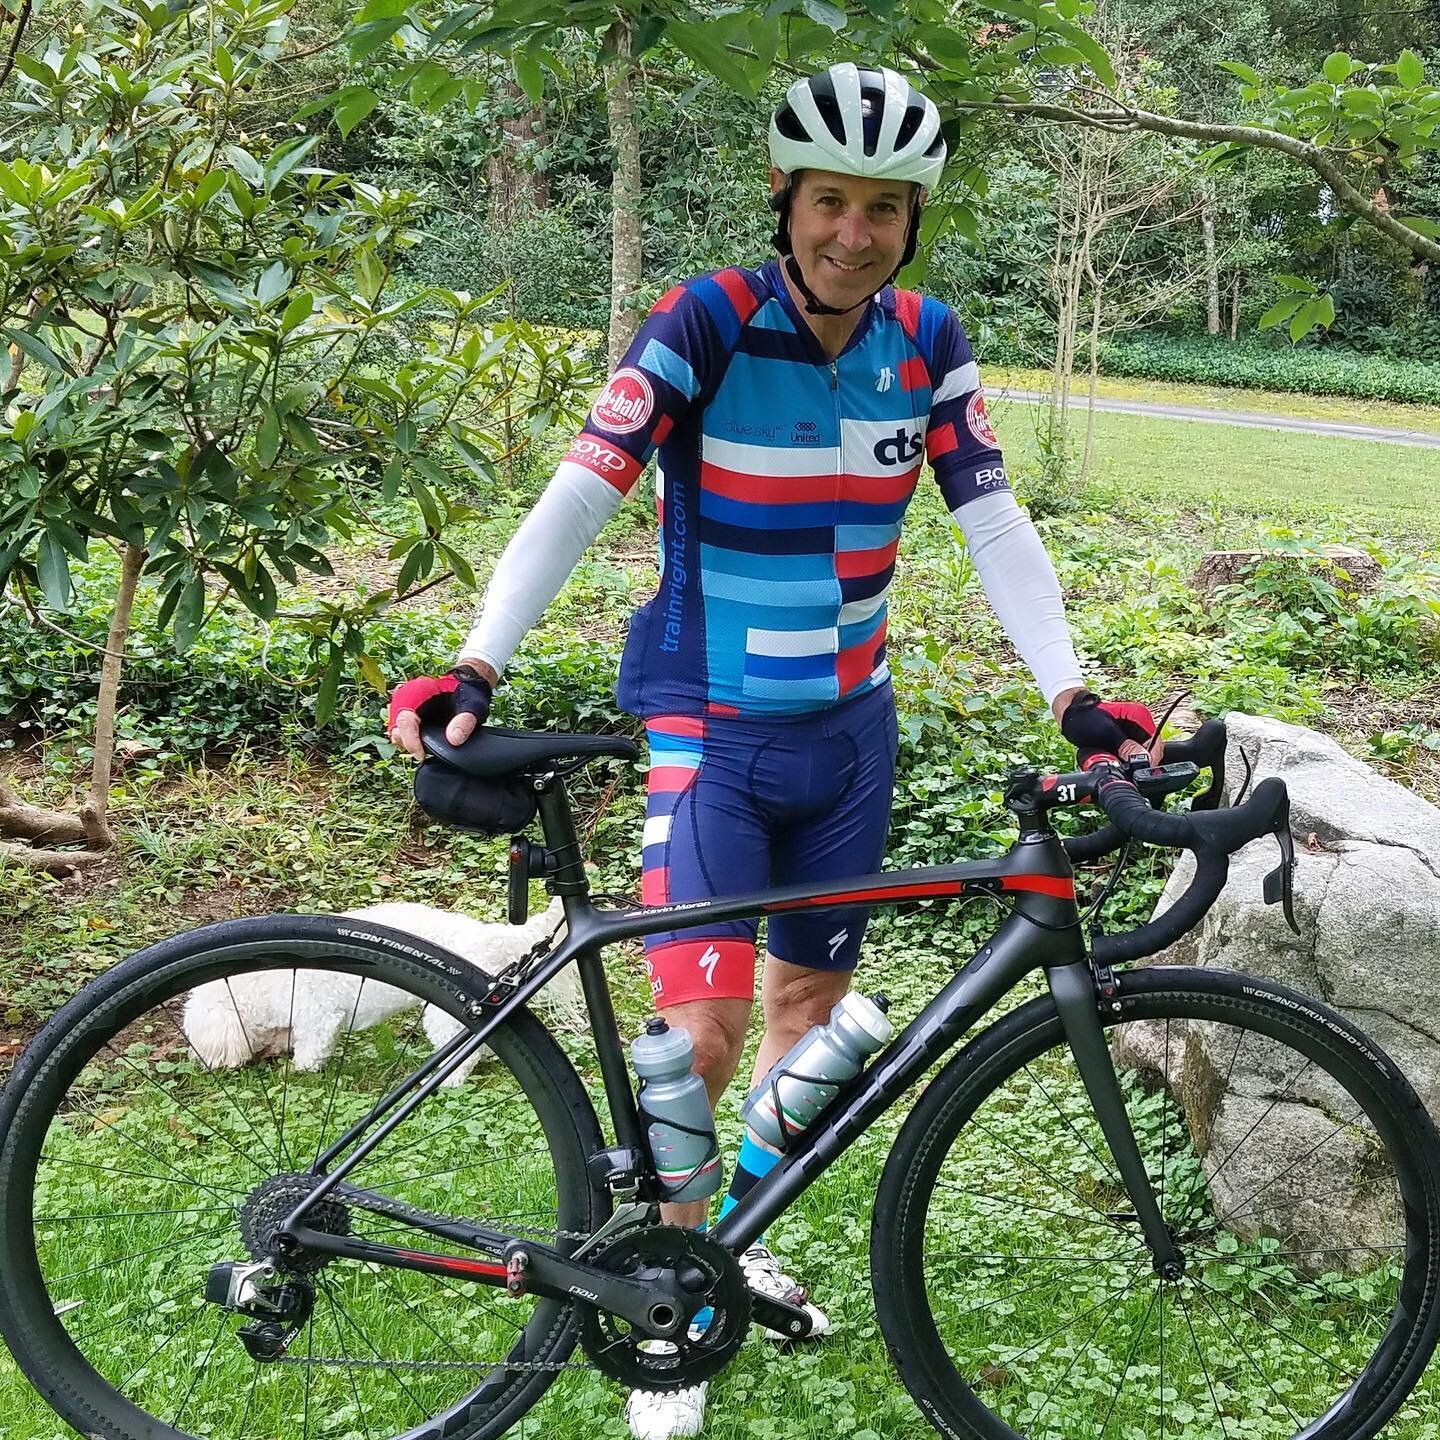 Today&rsquo;s &ldquo;Meet the CTS Team&rdquo; highlight is on Kevin Moran! Kevin lives in Brevard, NC: 

 &ldquo;I retired here about 20 years ago and ride the roads, gravel and trails in Transylvania and surrounding counties. Gravel is my favorite t